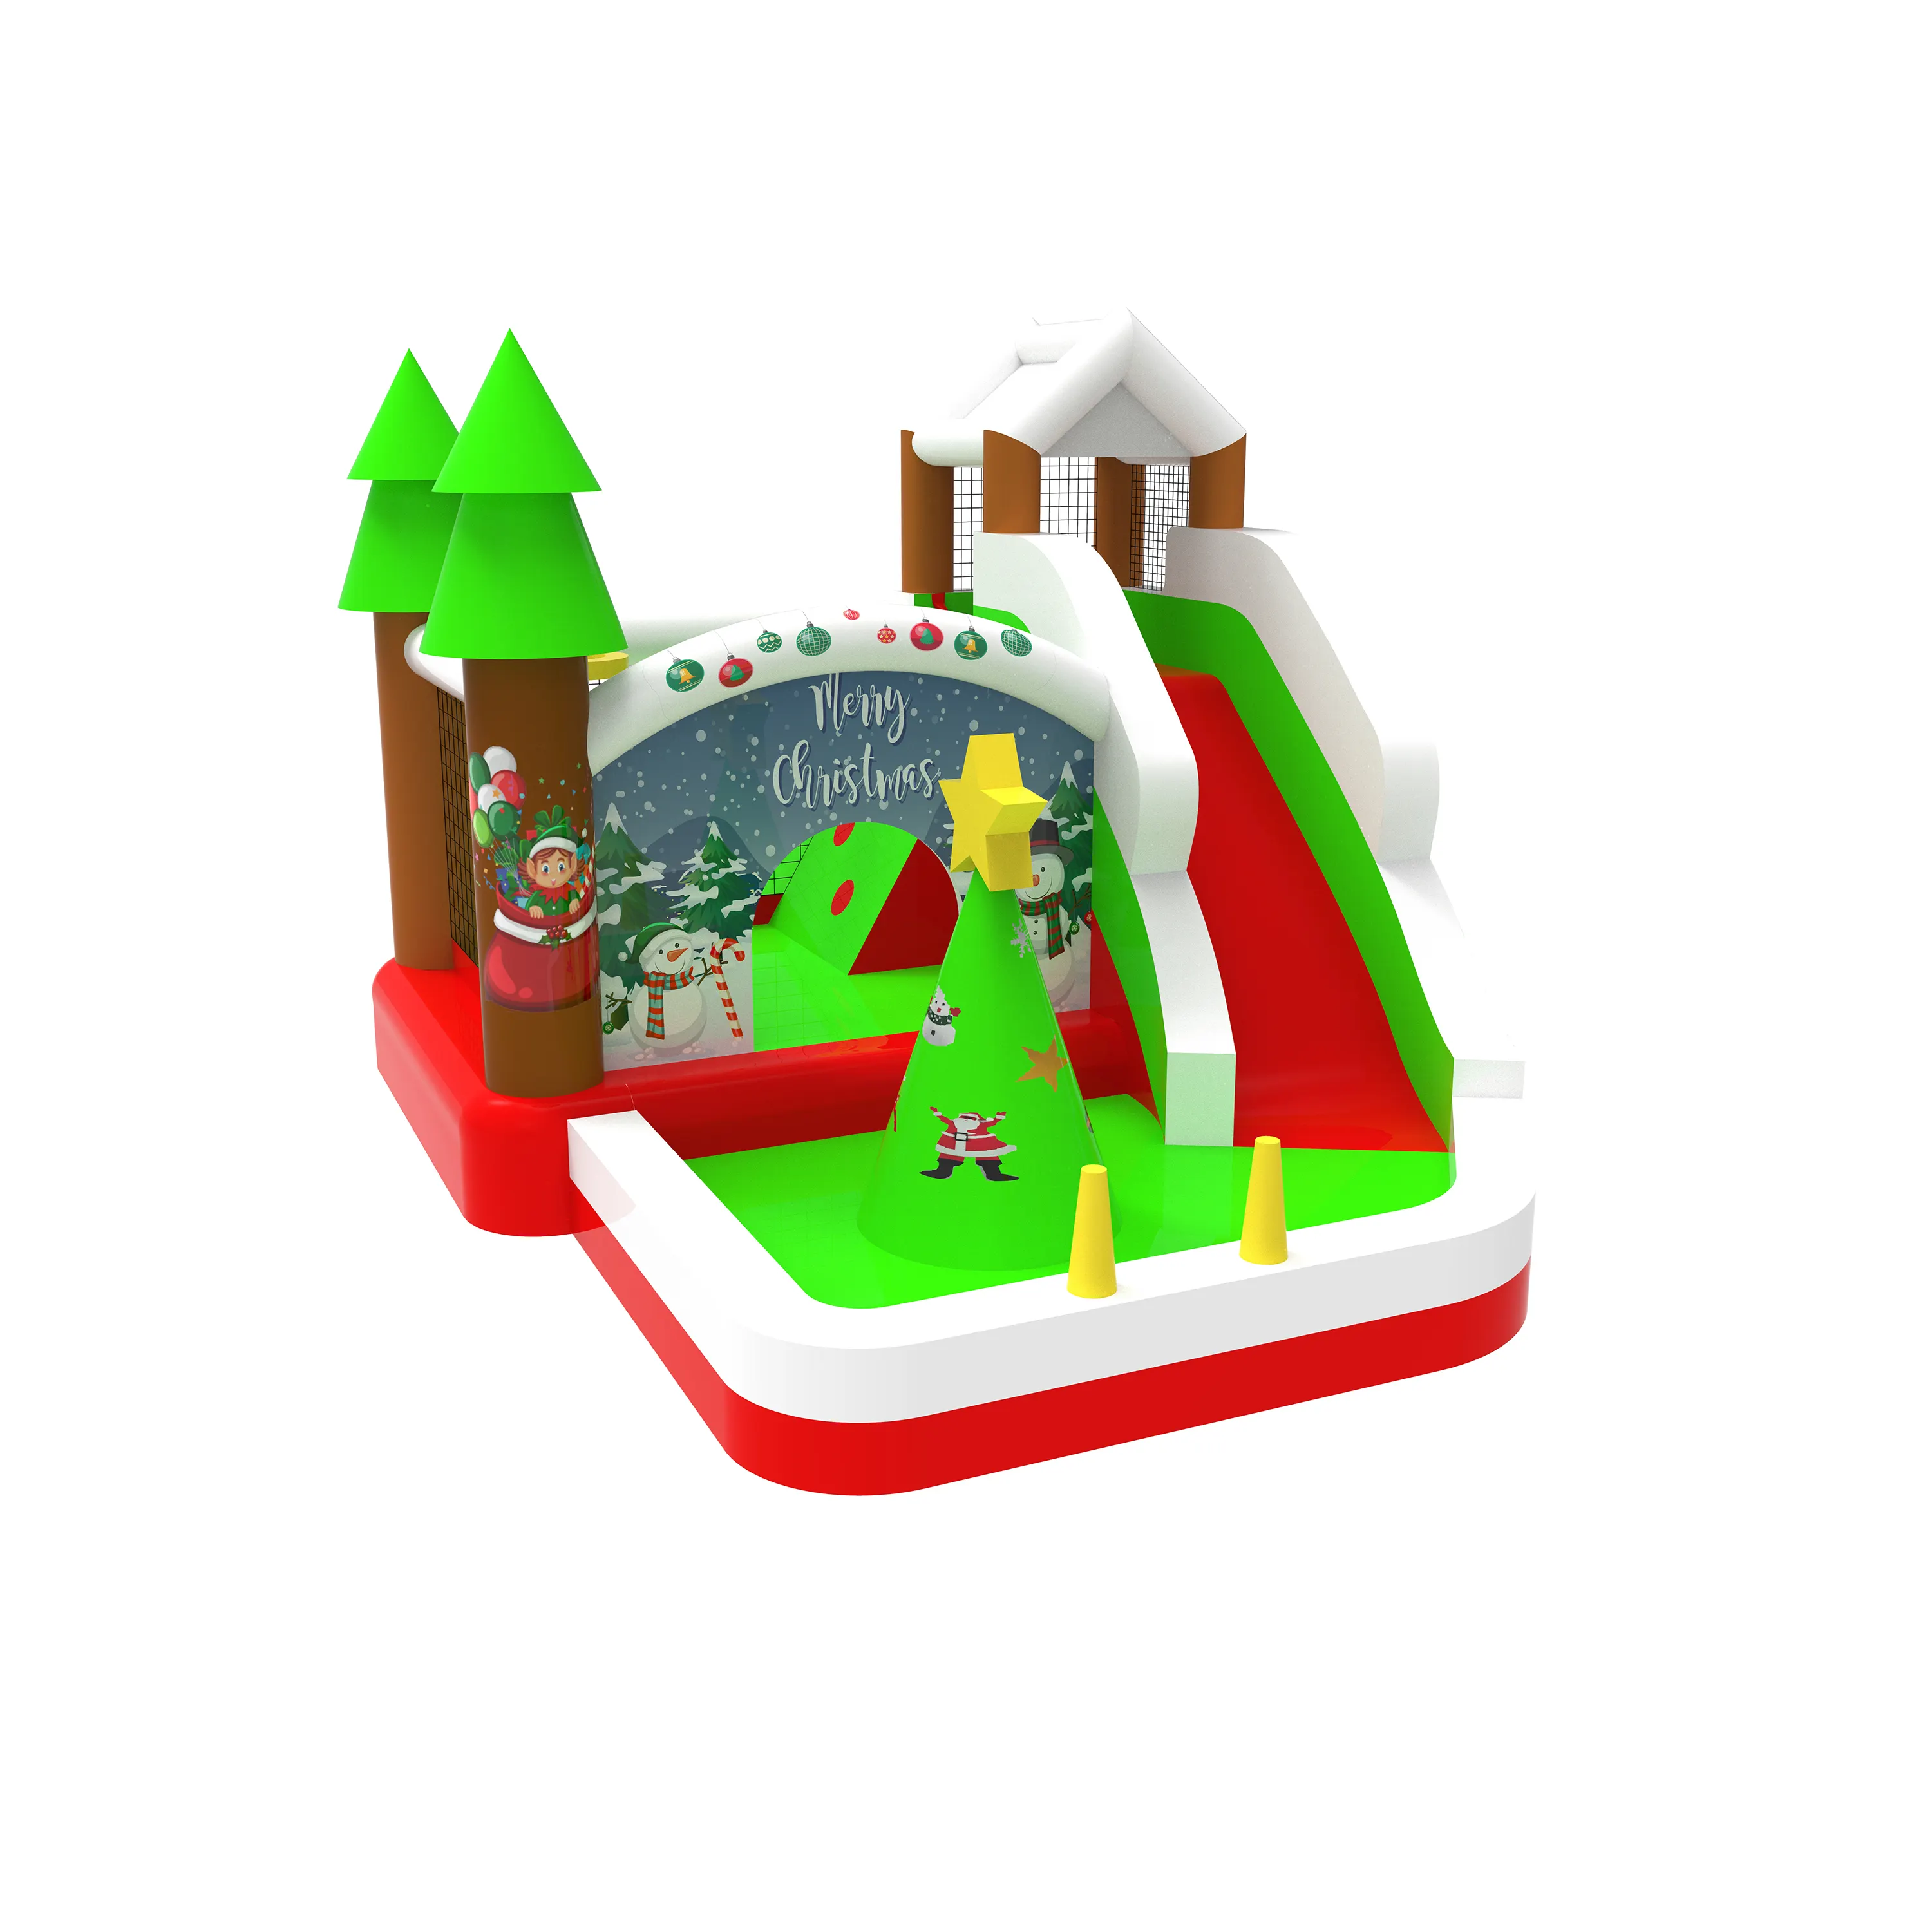 Christmas Inflatable Bounce House Jumping Castle Game For Christmas Party